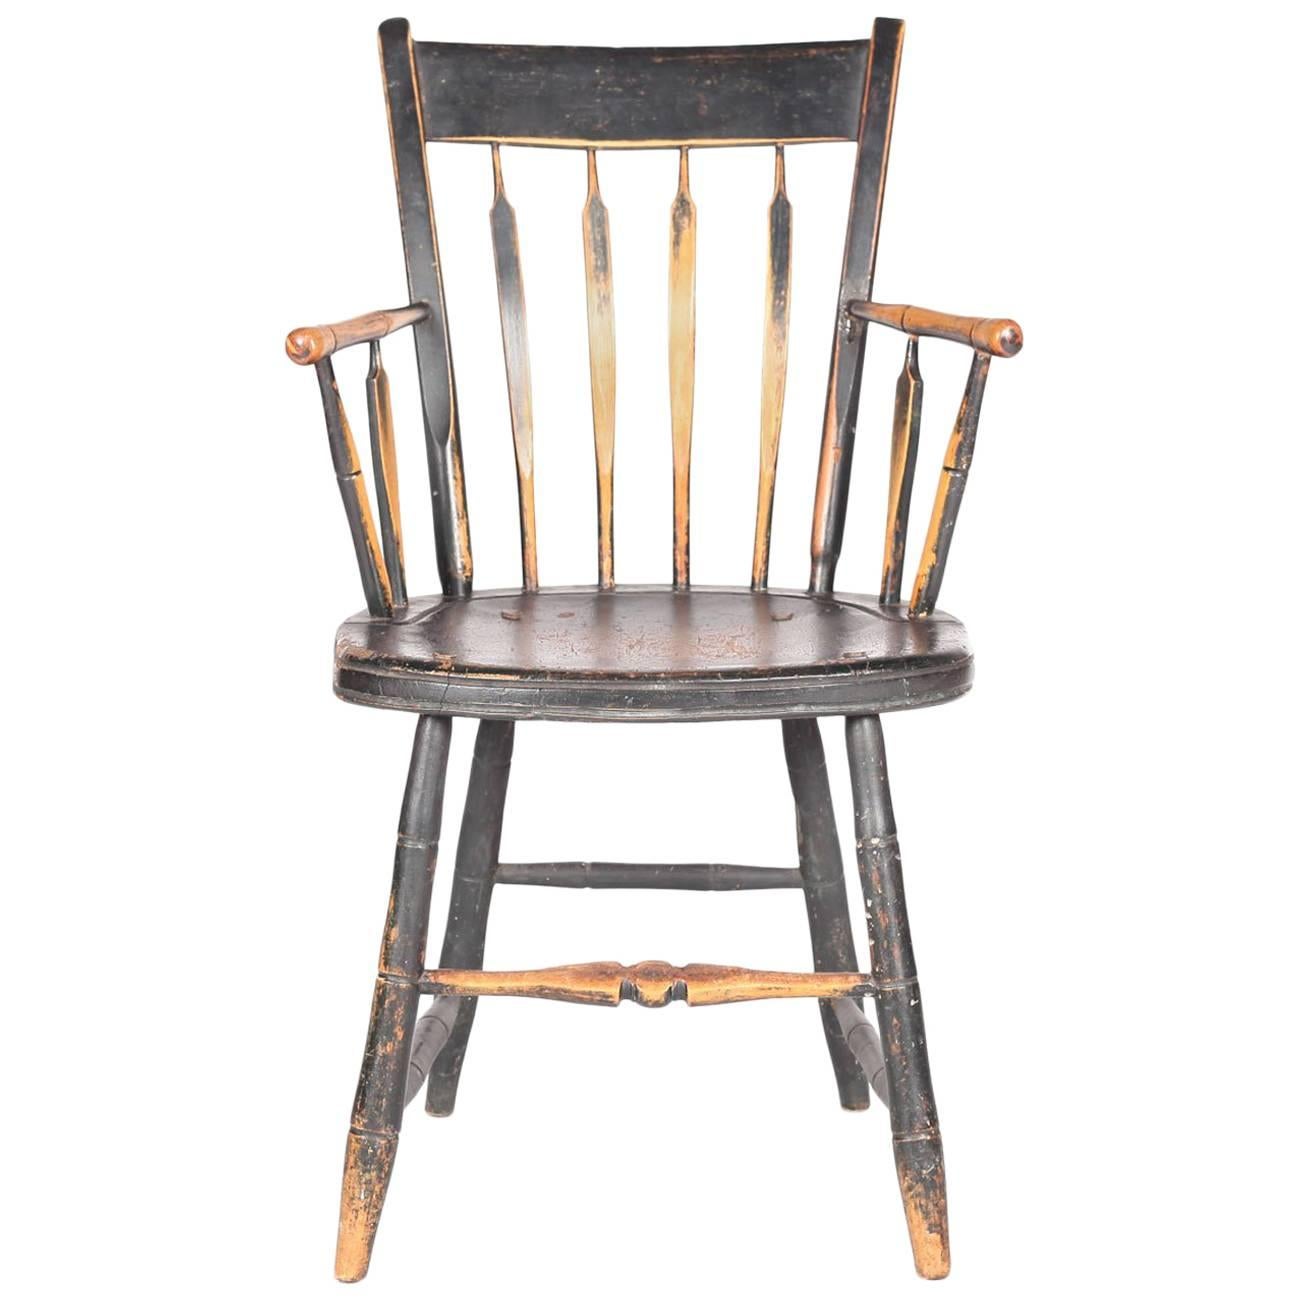 Antique American Windsor Chair with Original Paint, 19th Century For Sale